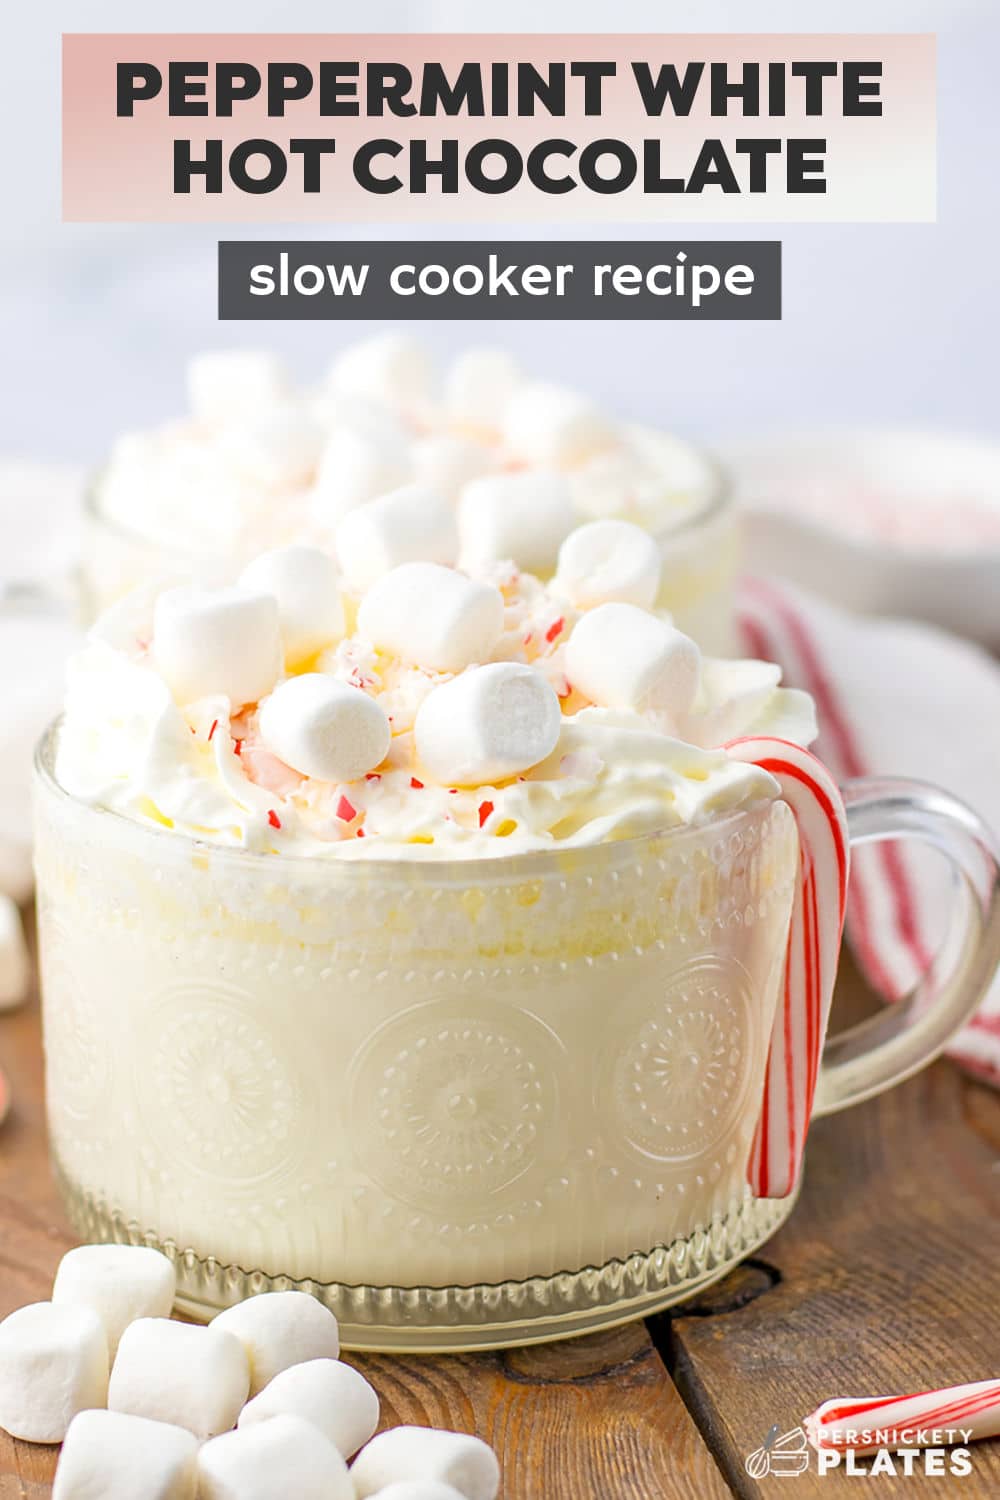 The ultimate winter drink is here! Make a big batch of this peppermint white hot chocolate recipe right in your slow cooker so everyone can have a mug or two. The rich creamy white hot chocolate with a wintry peppermint kick will have you and your loved ones feeling all the warm fuzzies from the inside out. | www.persnicketyplates.com